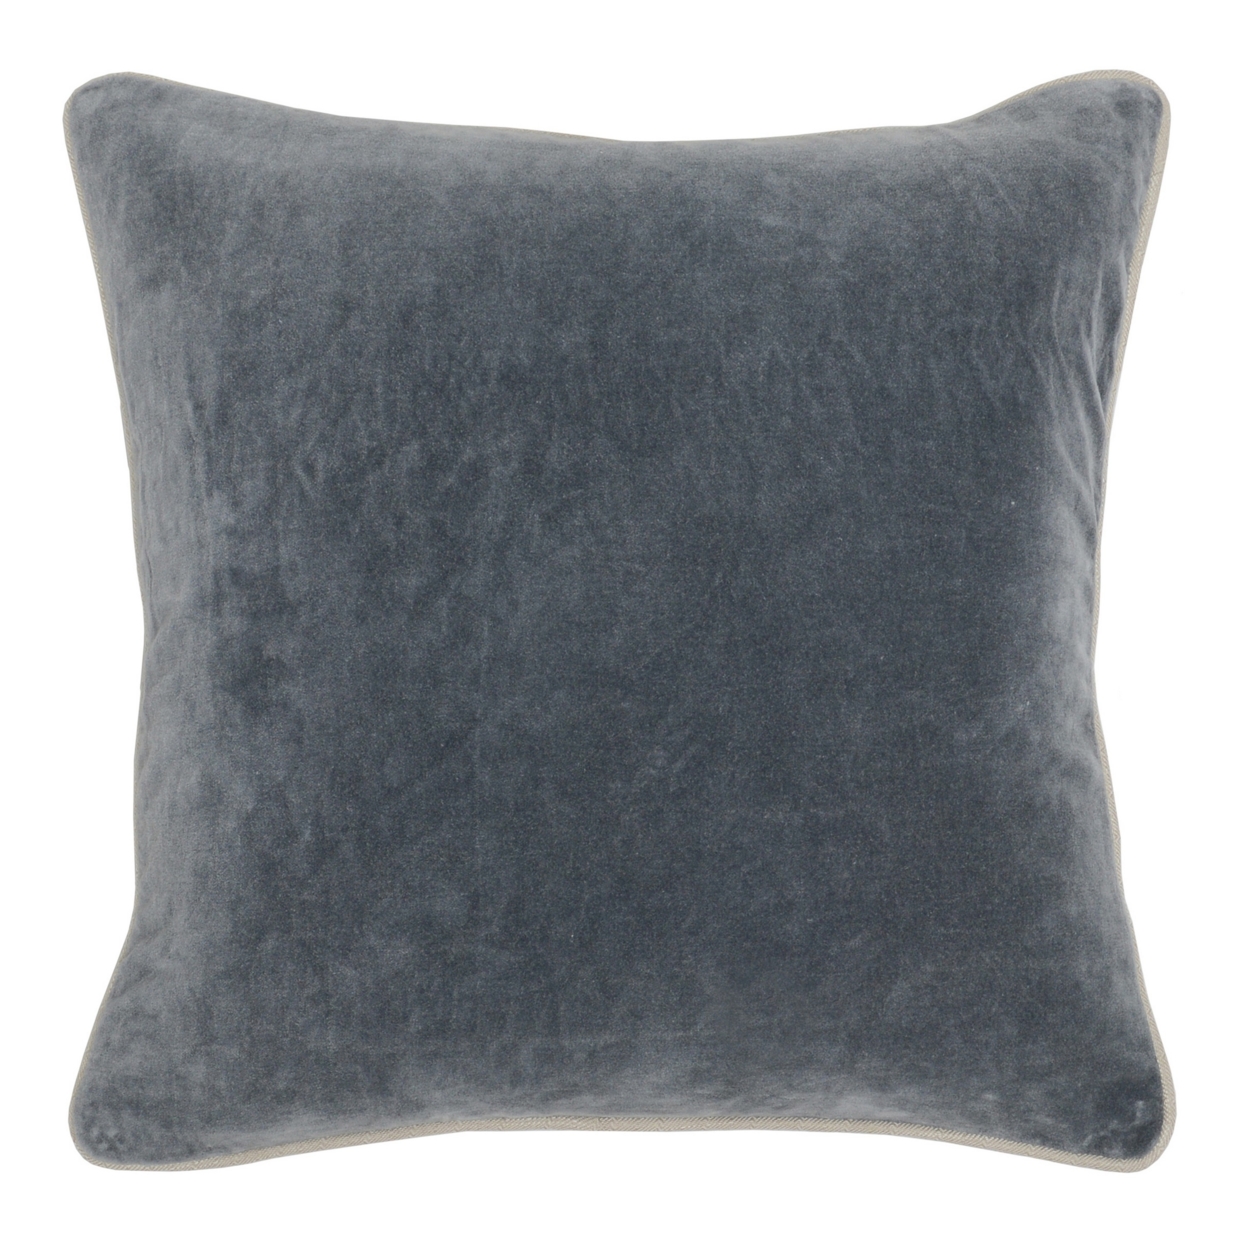 Square Fabric Throw Pillow With Solid Color And Piped Edges, Gray- Saltoro Sherpi